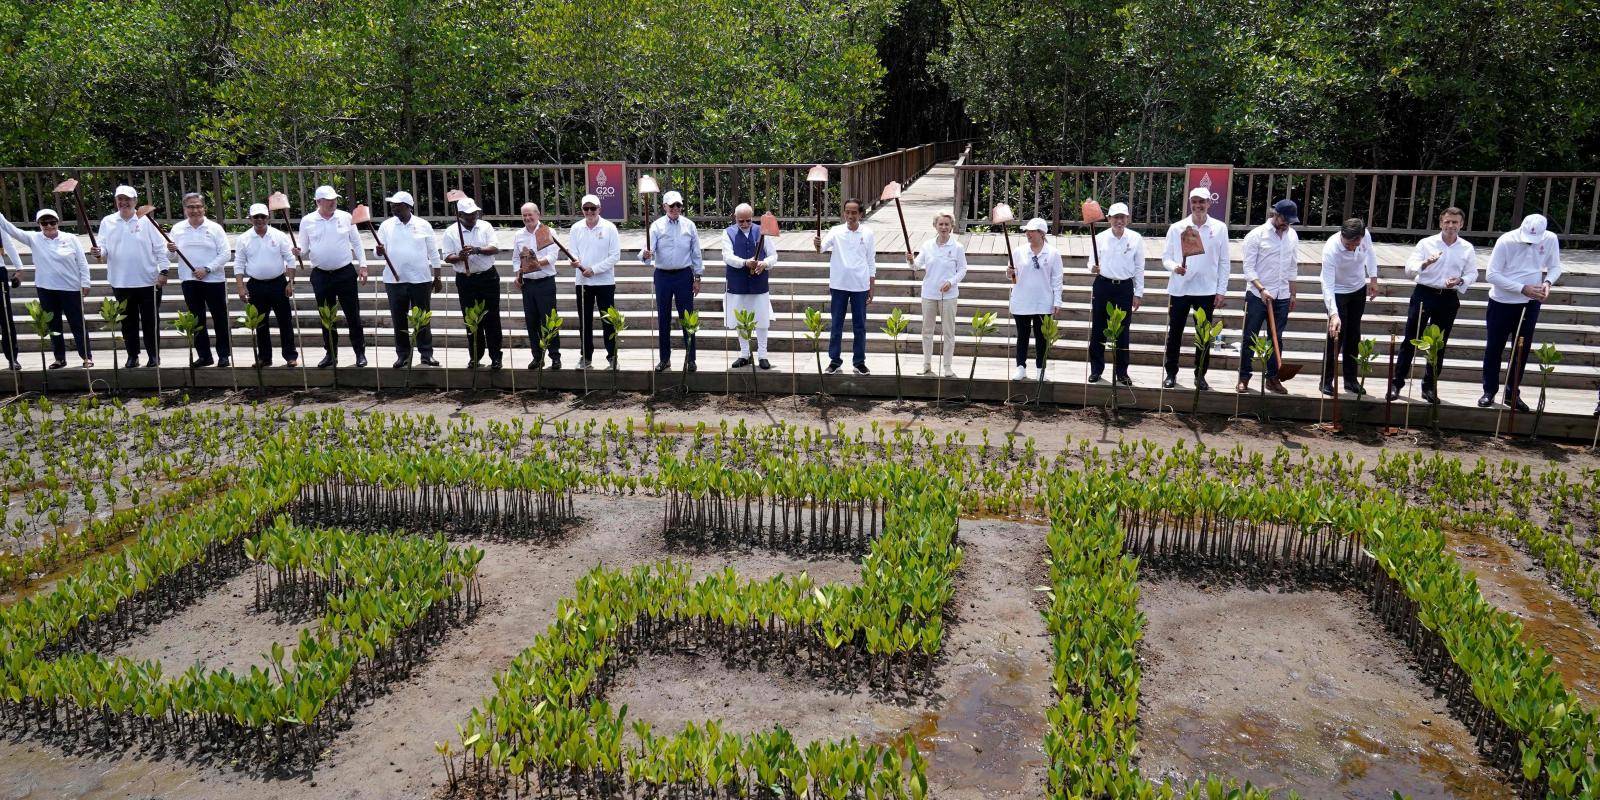 G20 leaders at a tree-planting event on the sidelines of the G20 summit in Bali, Indonesia, November 2022.